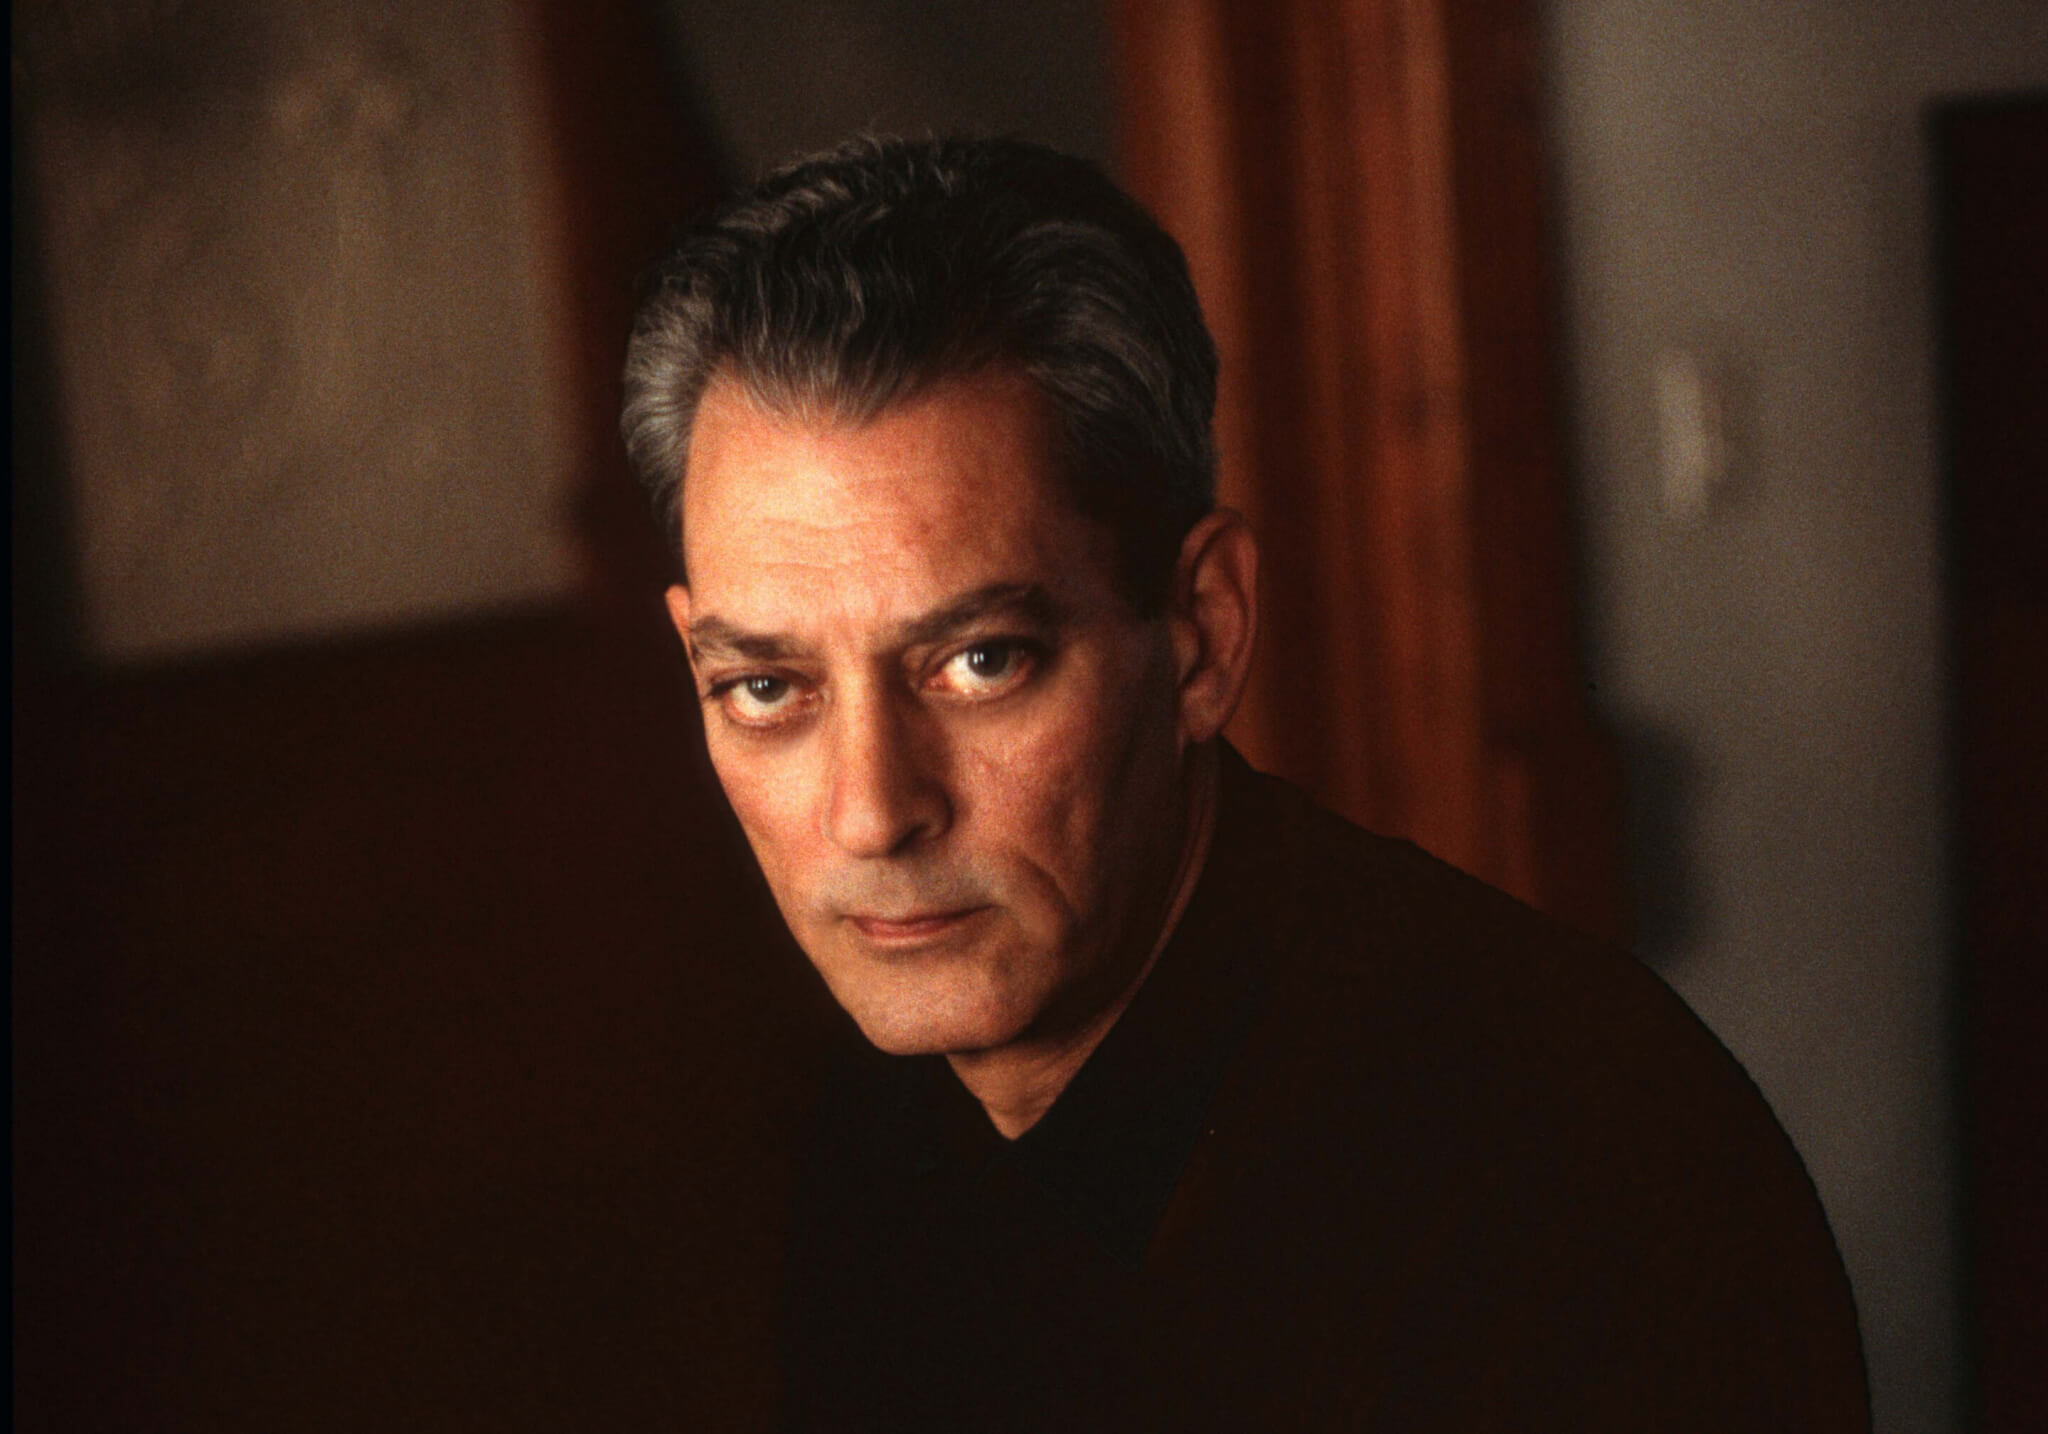 Paul Auster, who chronicled New York on the page and on screen, dies at 77